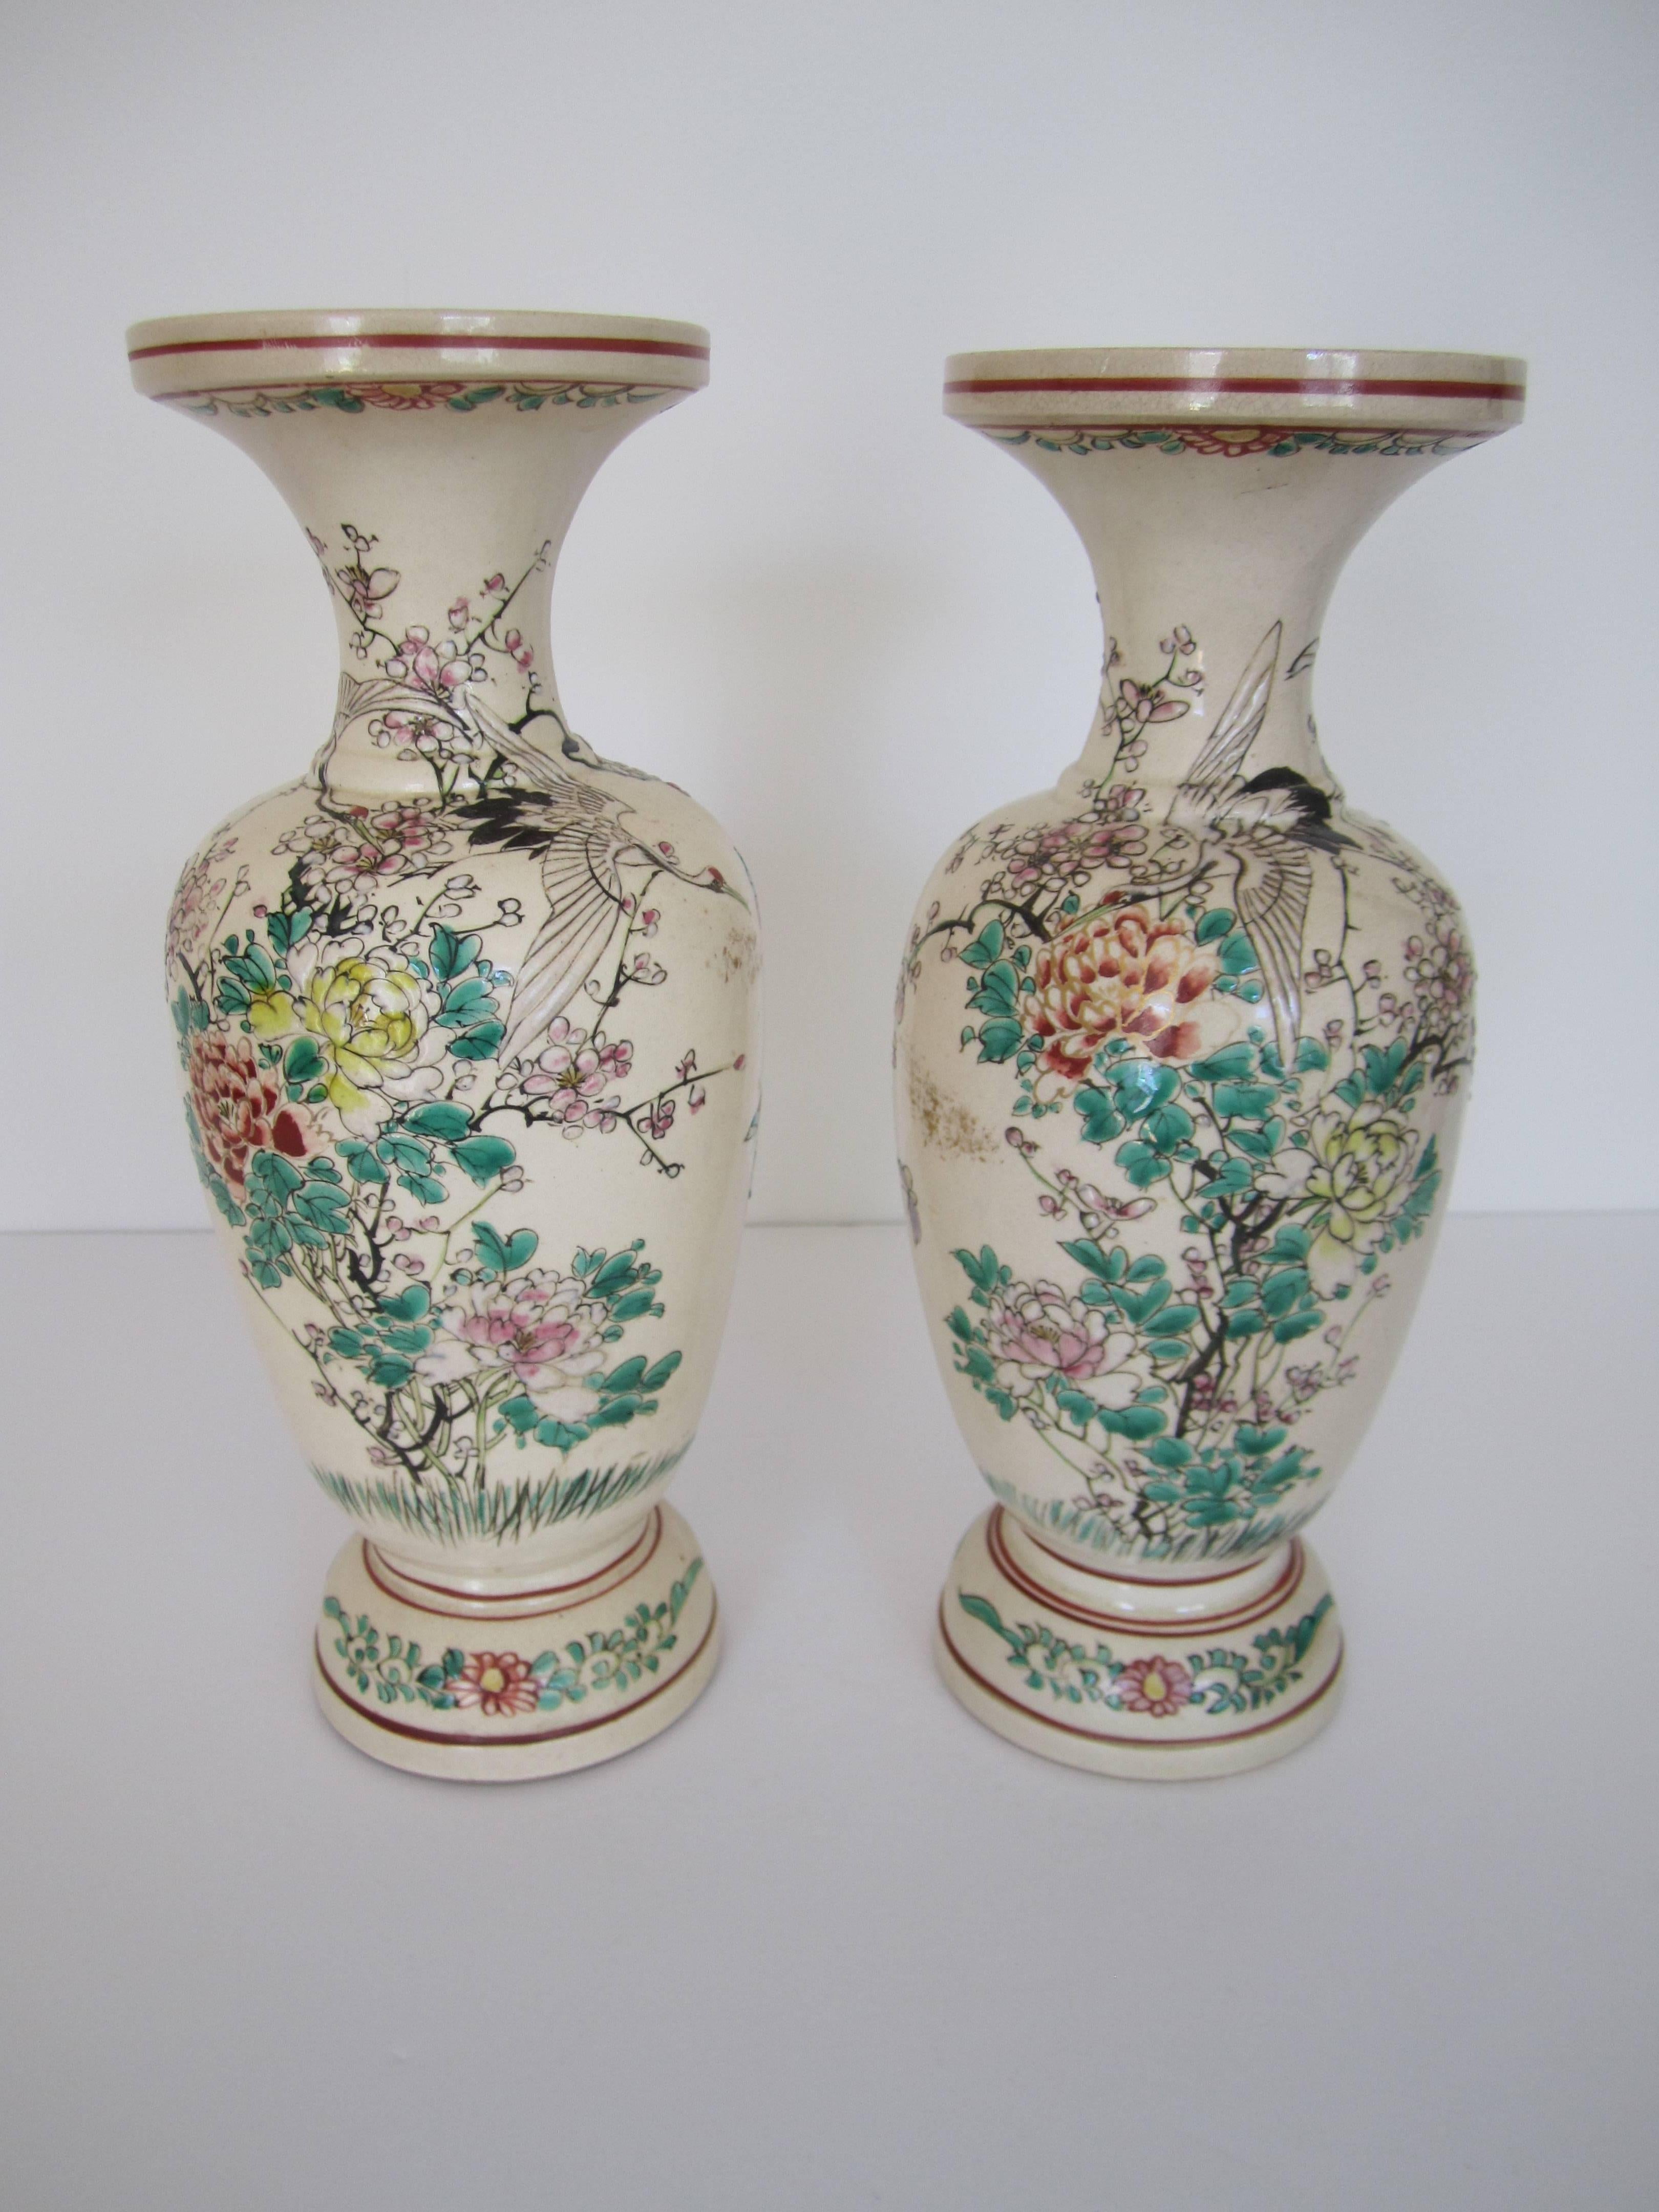 Painted Japanese Earthenware Vases with Birds and Butterflies, Pair  For Sale